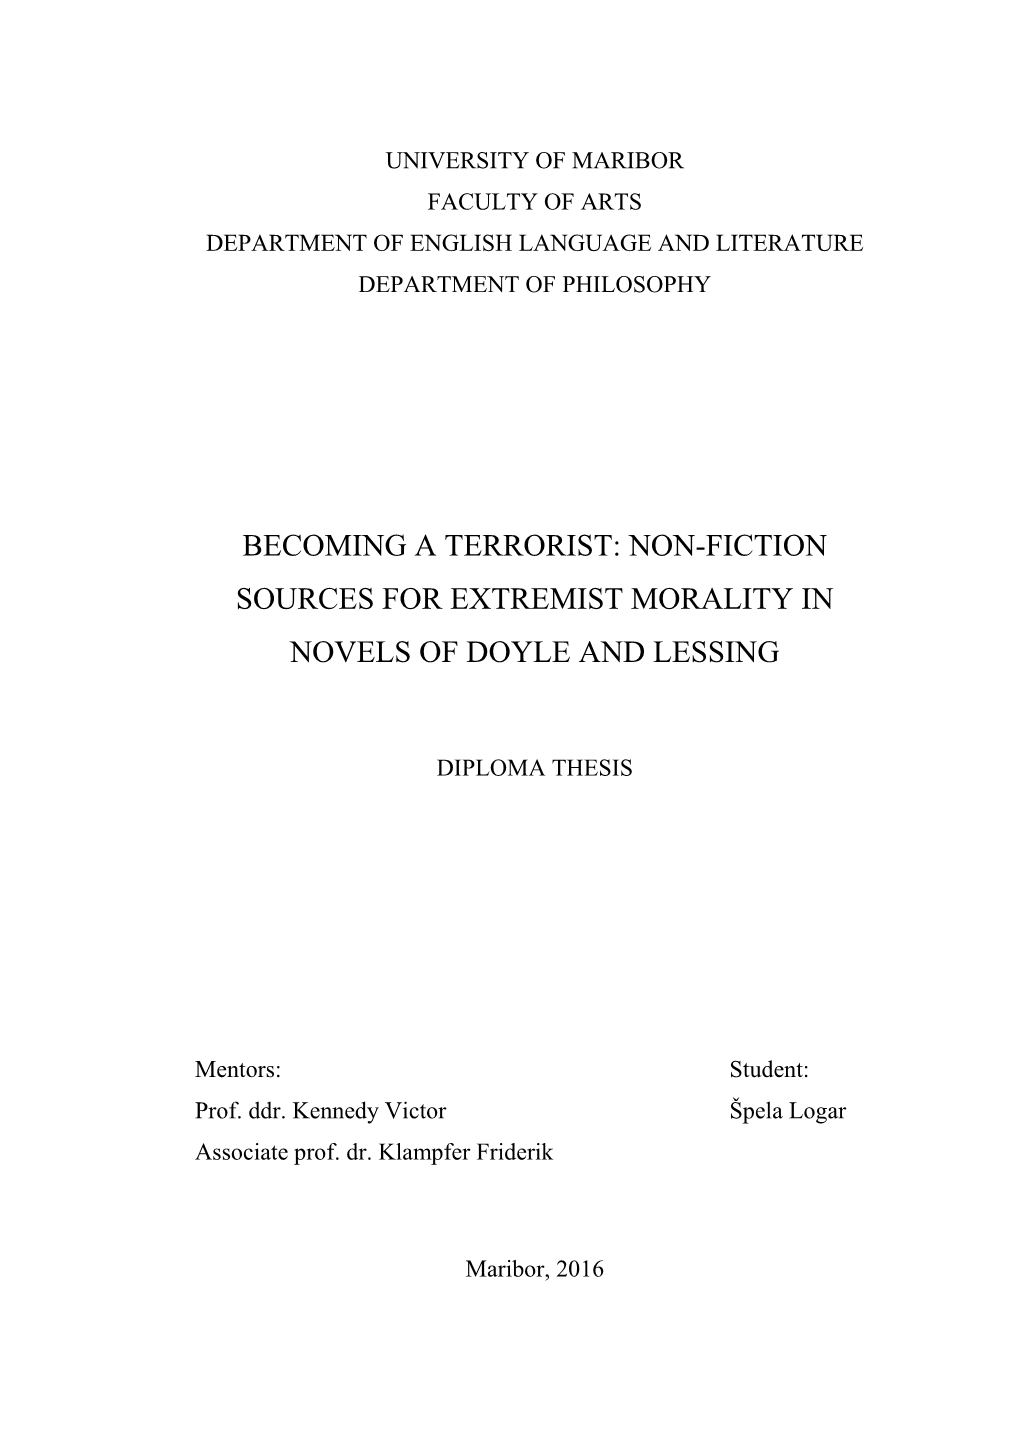 Becoming a Terrorist: Non-Fiction Sources for Extremist Morality in Novels of Doyle and Lessing